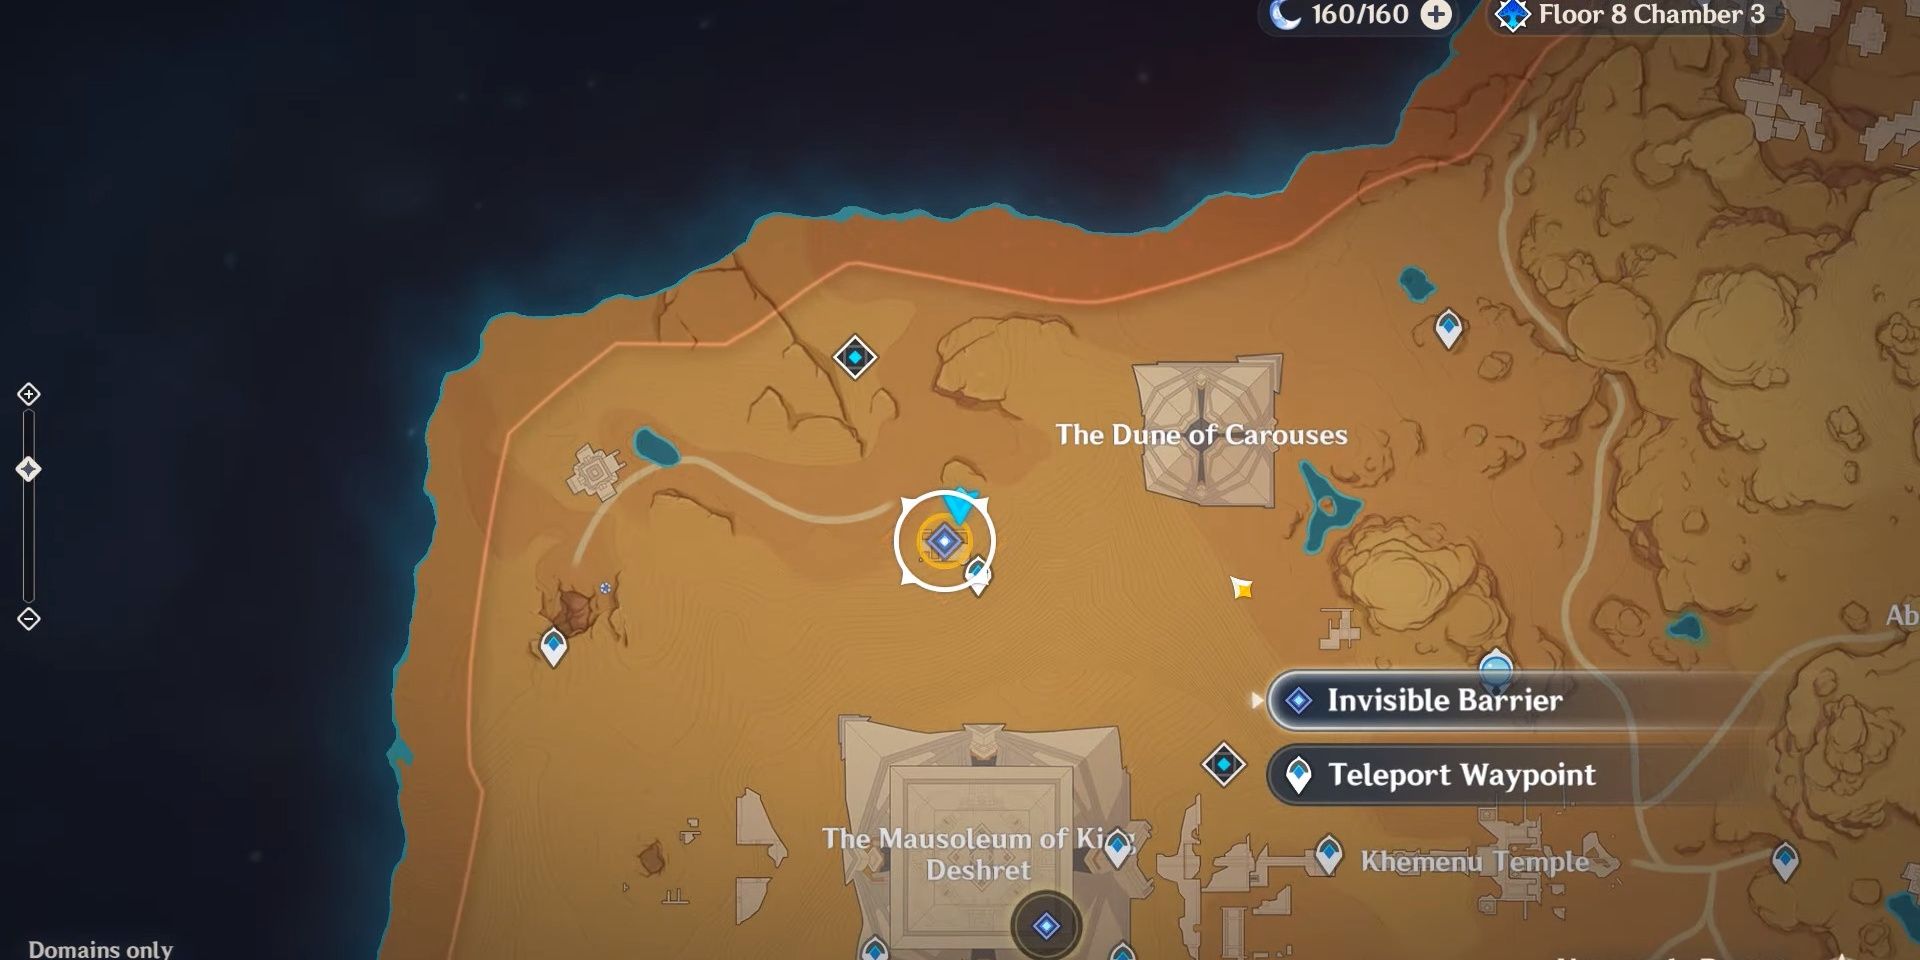 Image of the location on the map of the second transparent ruins in Genshin Impact.